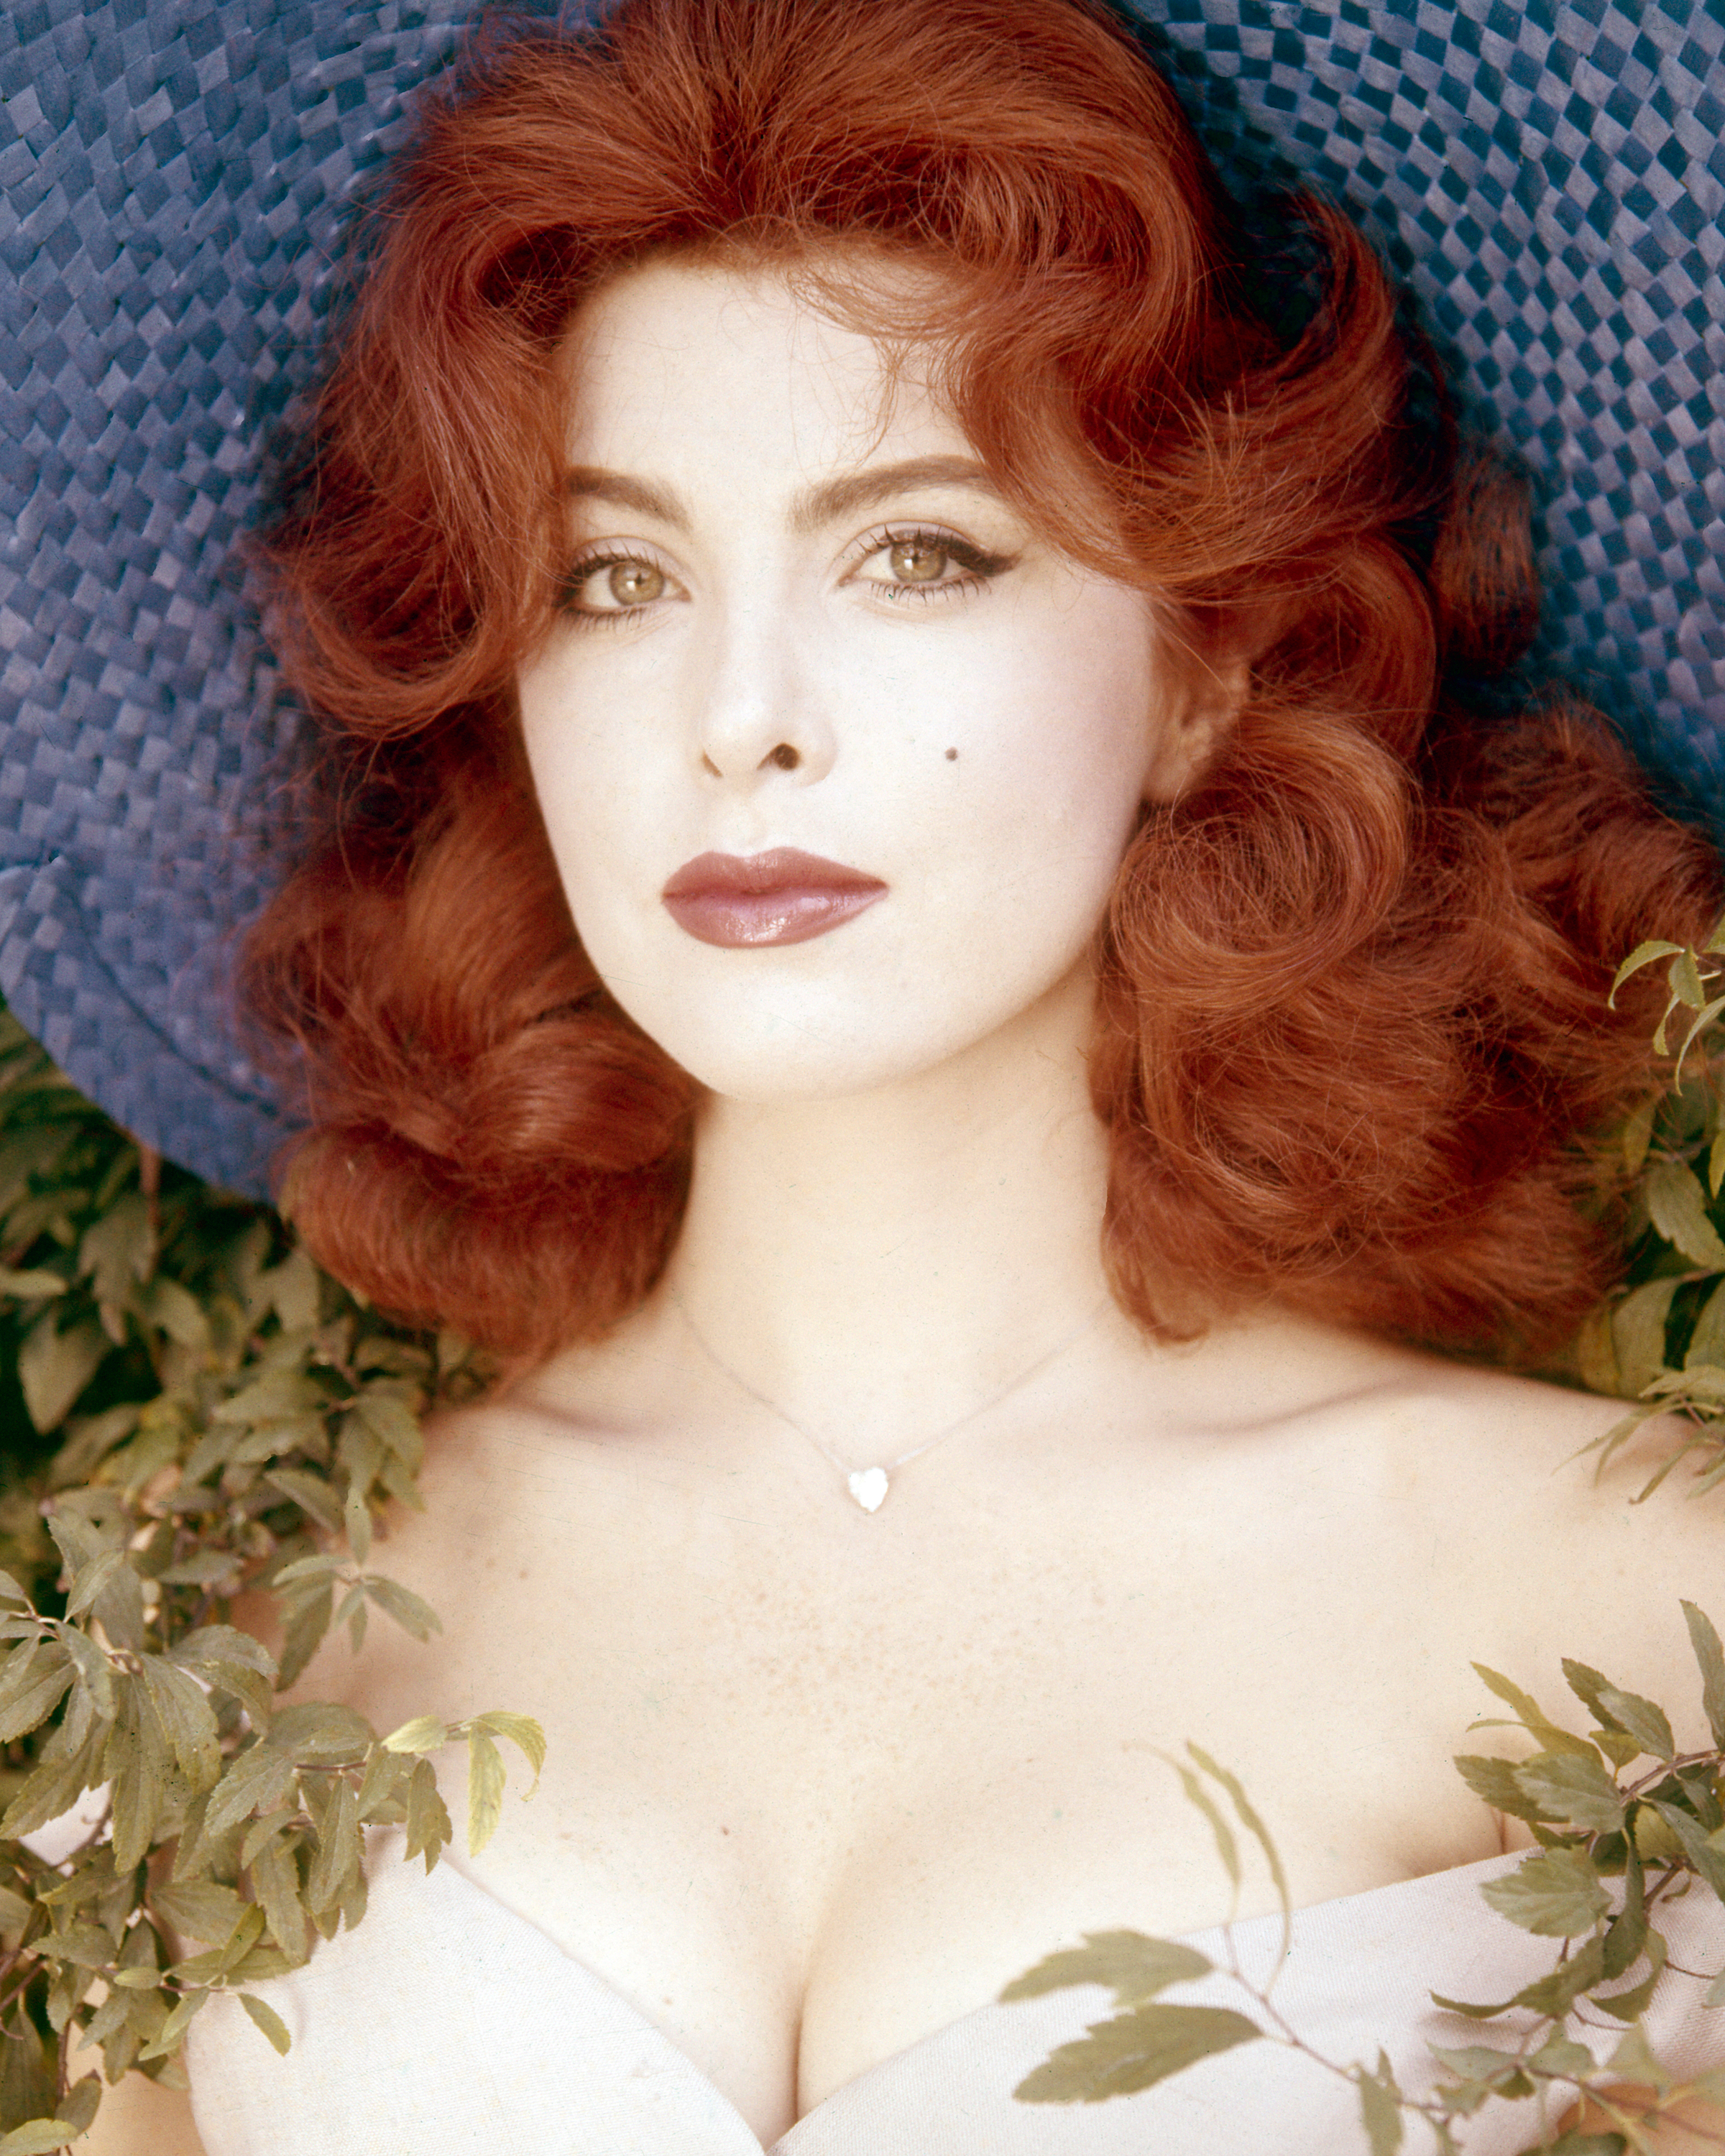 Tina Louise posing for a photo, circa 1965 | Source: Getty Images